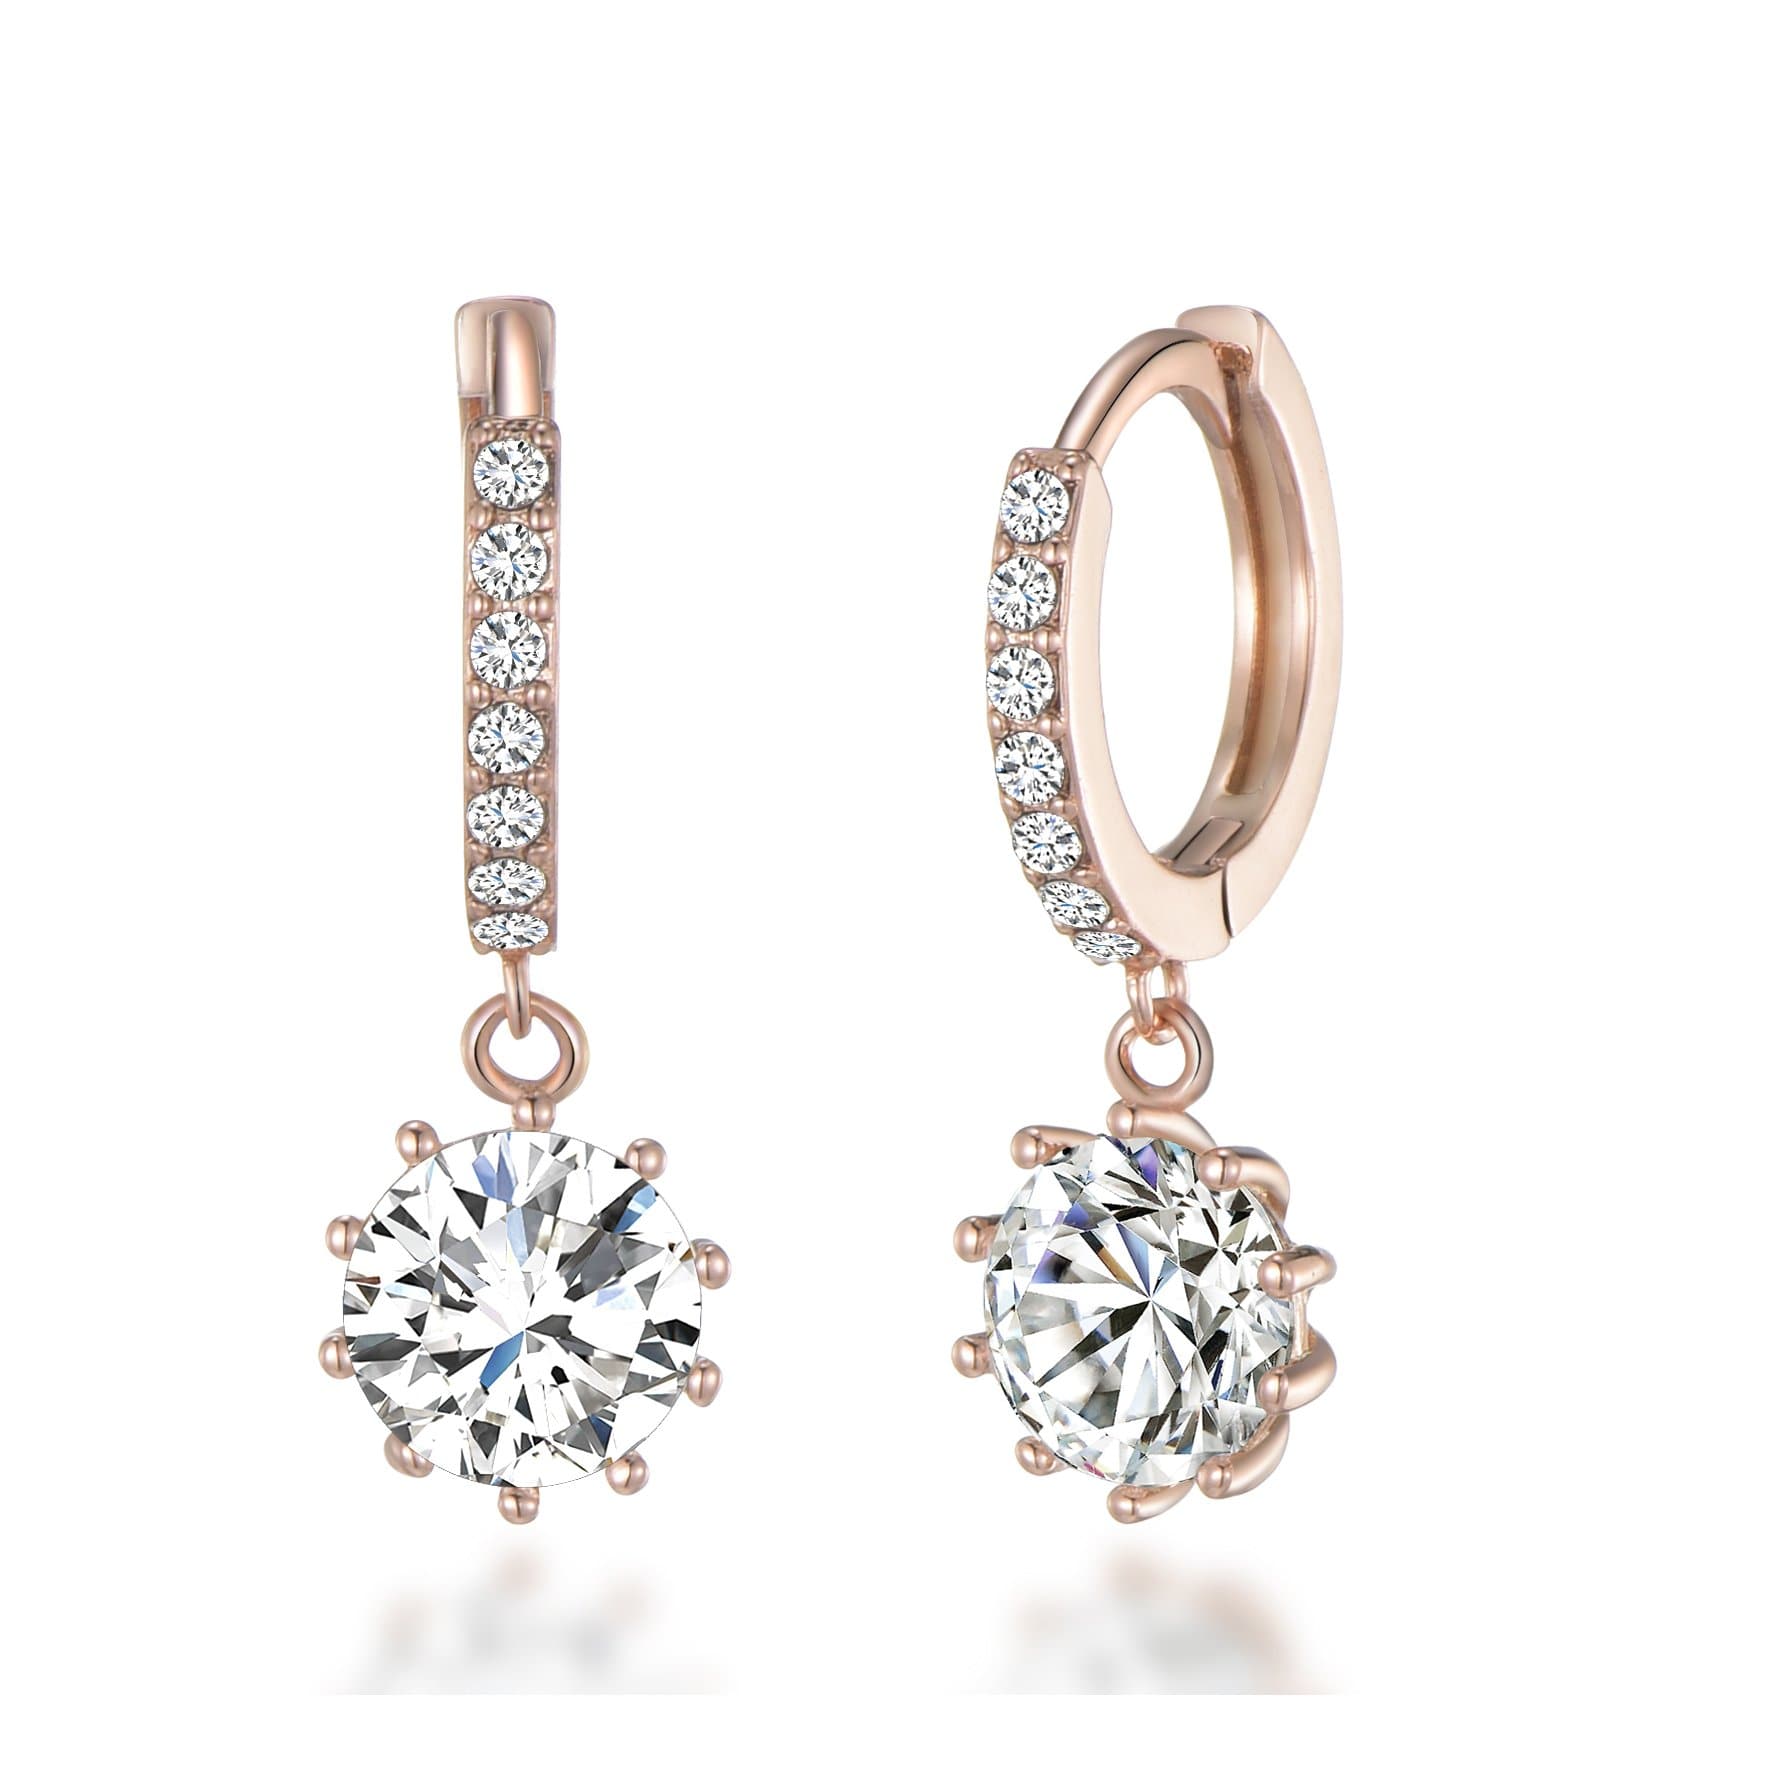 Rose Gold Plated Solitaire Drop Hoop Earrings Created with Zircondia® Crystals by Philip Jones Jewellery